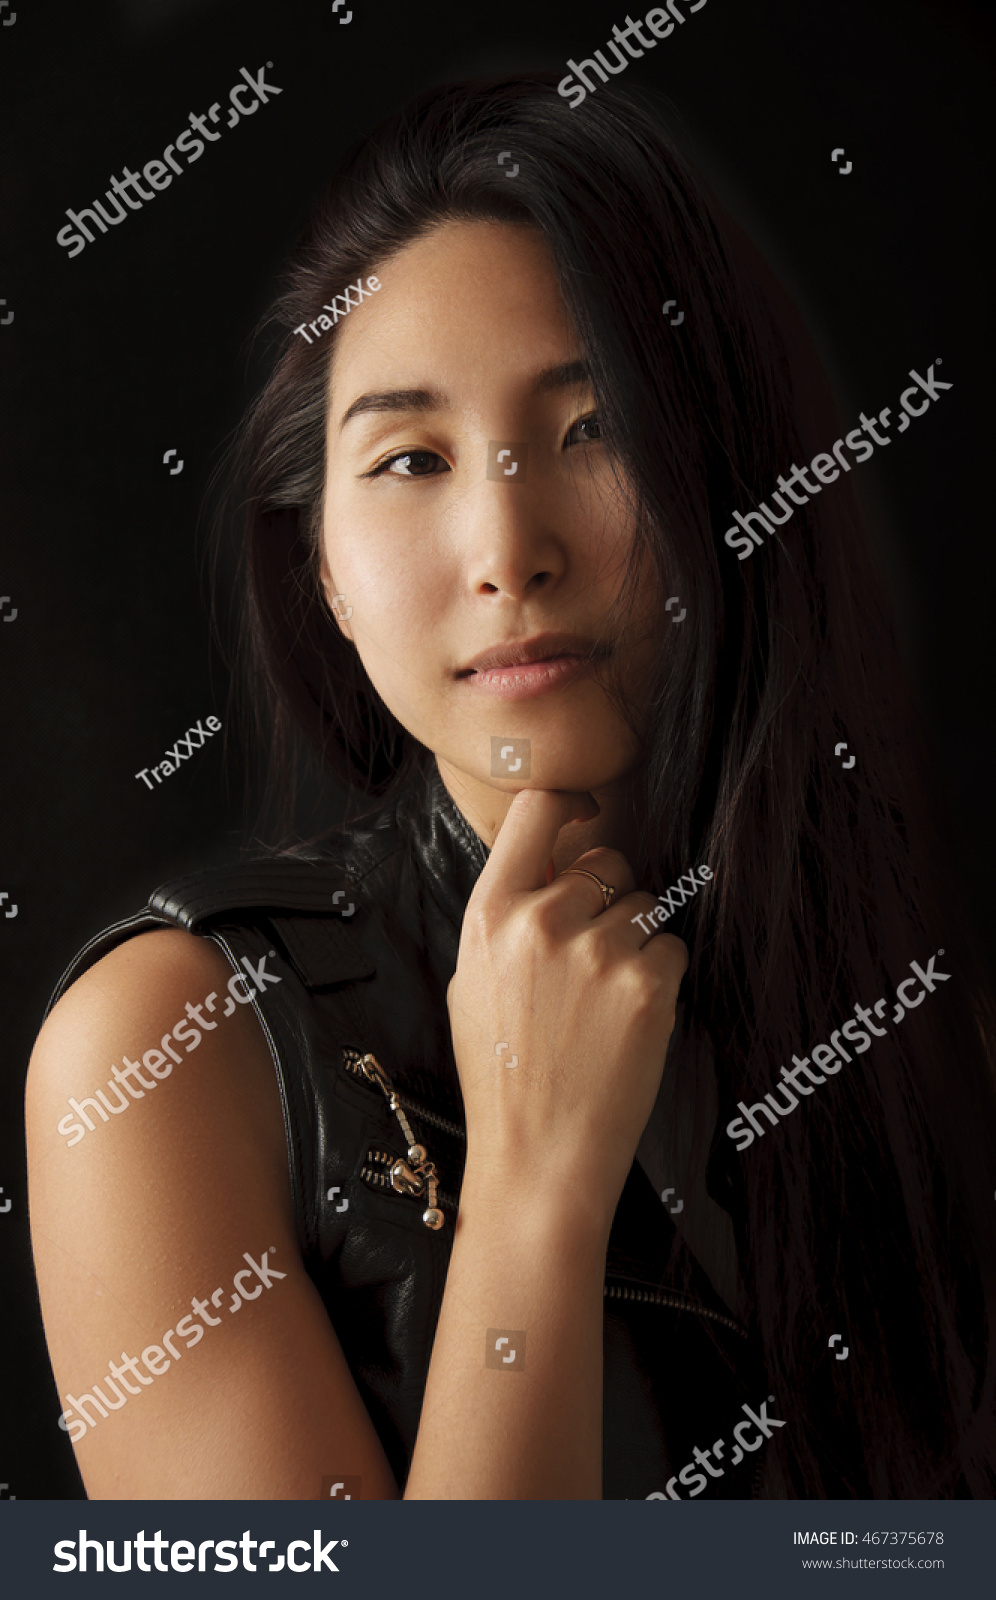 https://image.shutterstock.com/z/stock-photo-portrait-of-beautiful-mongolian-woman-with-serious-look-on-black-background-467375678.jpg